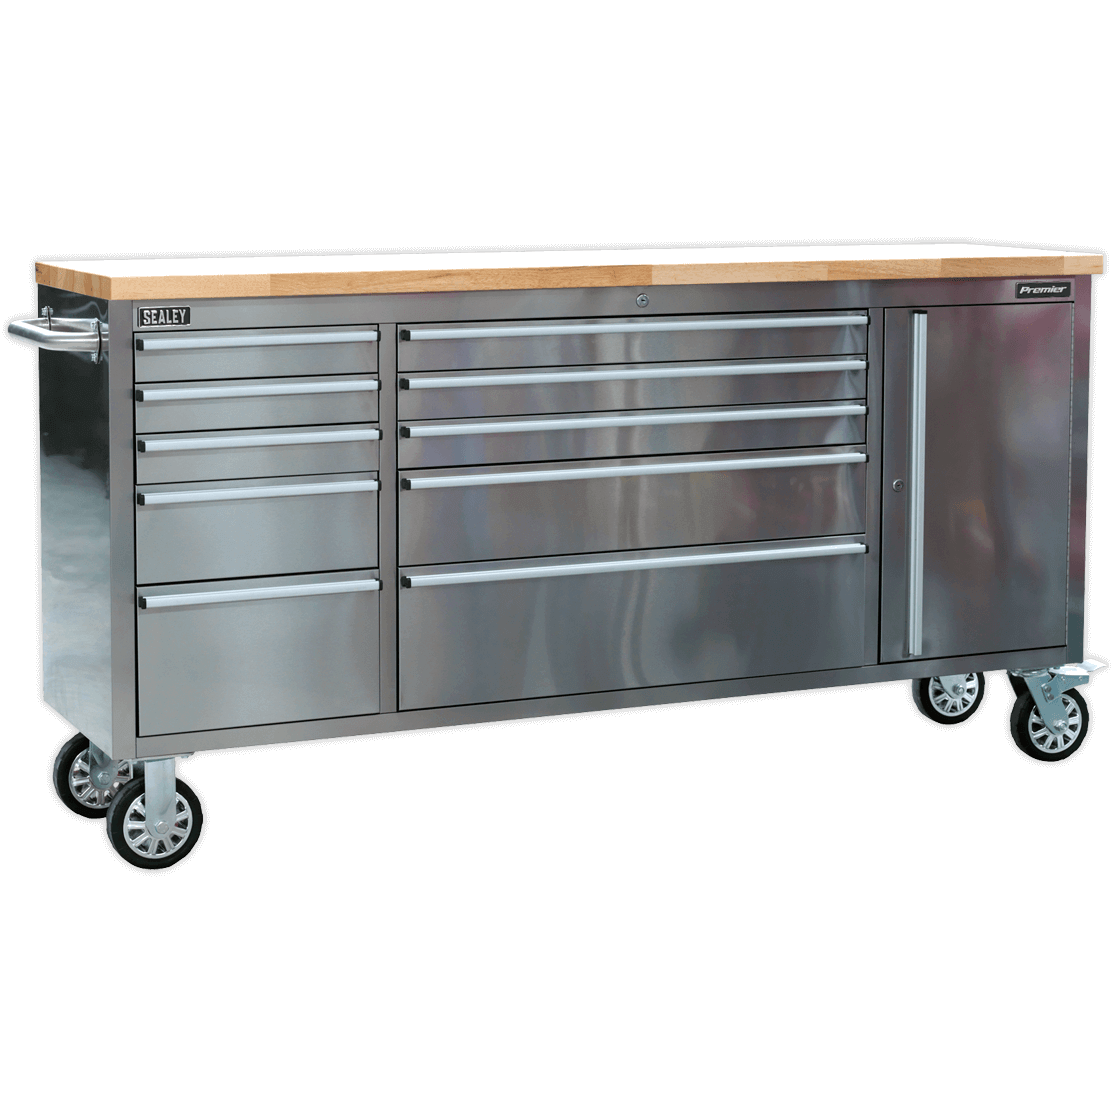 Sealey 10 Drawer Mobile Stainless Steel Tool Cabinet and End Cupboard Stainless Steel